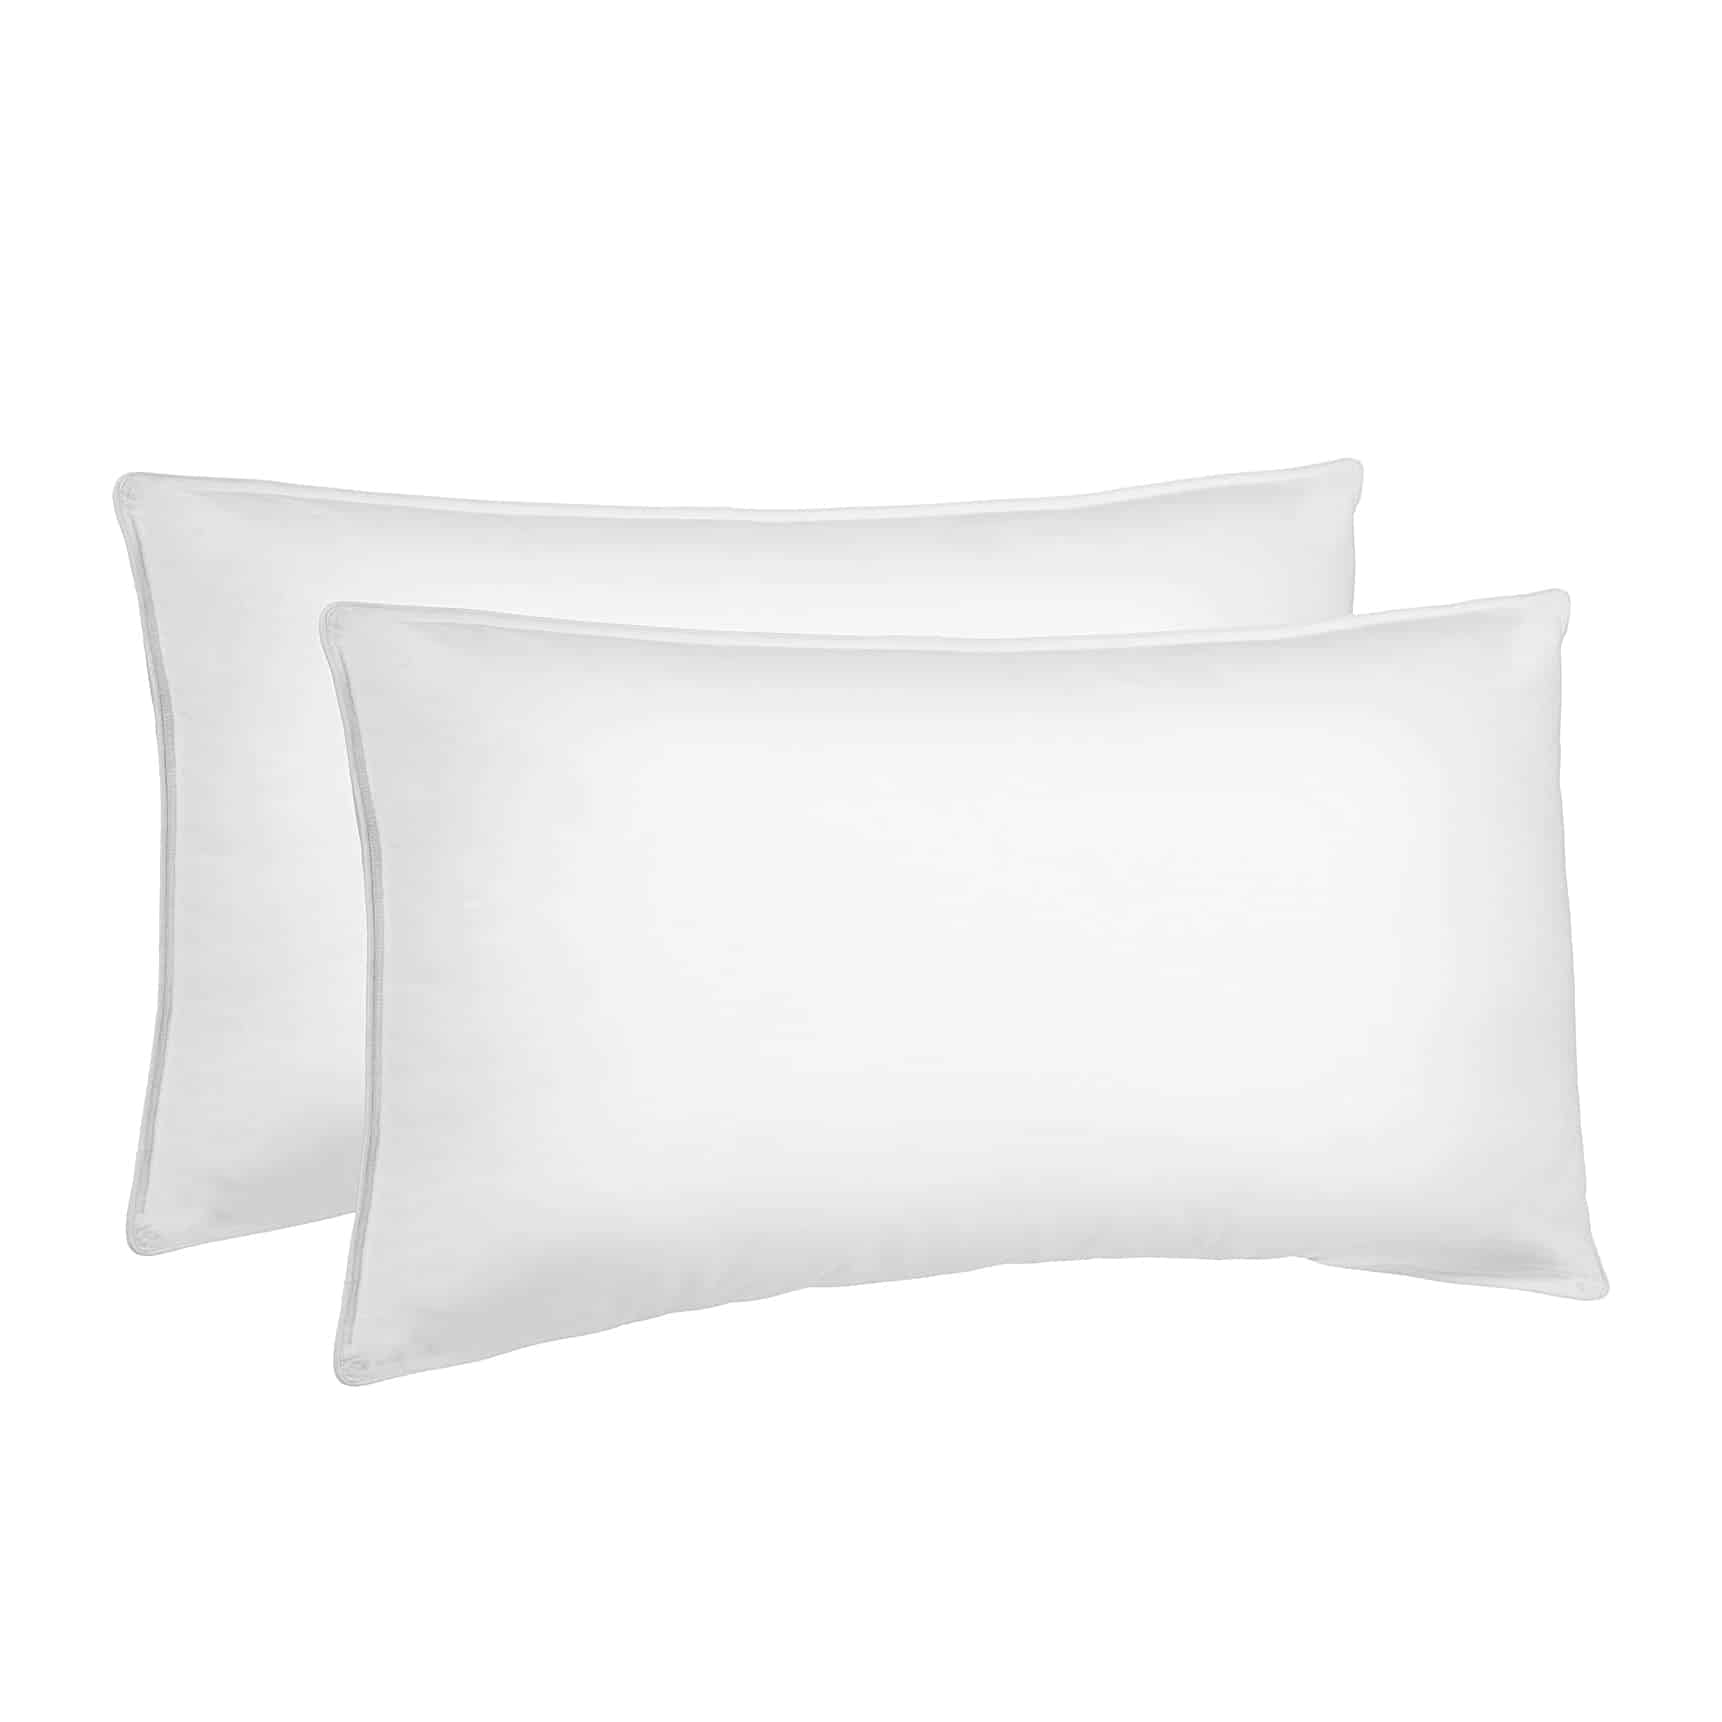 Top 10 Best Large Pillows in 2021 Reviews | Buyer's Guide